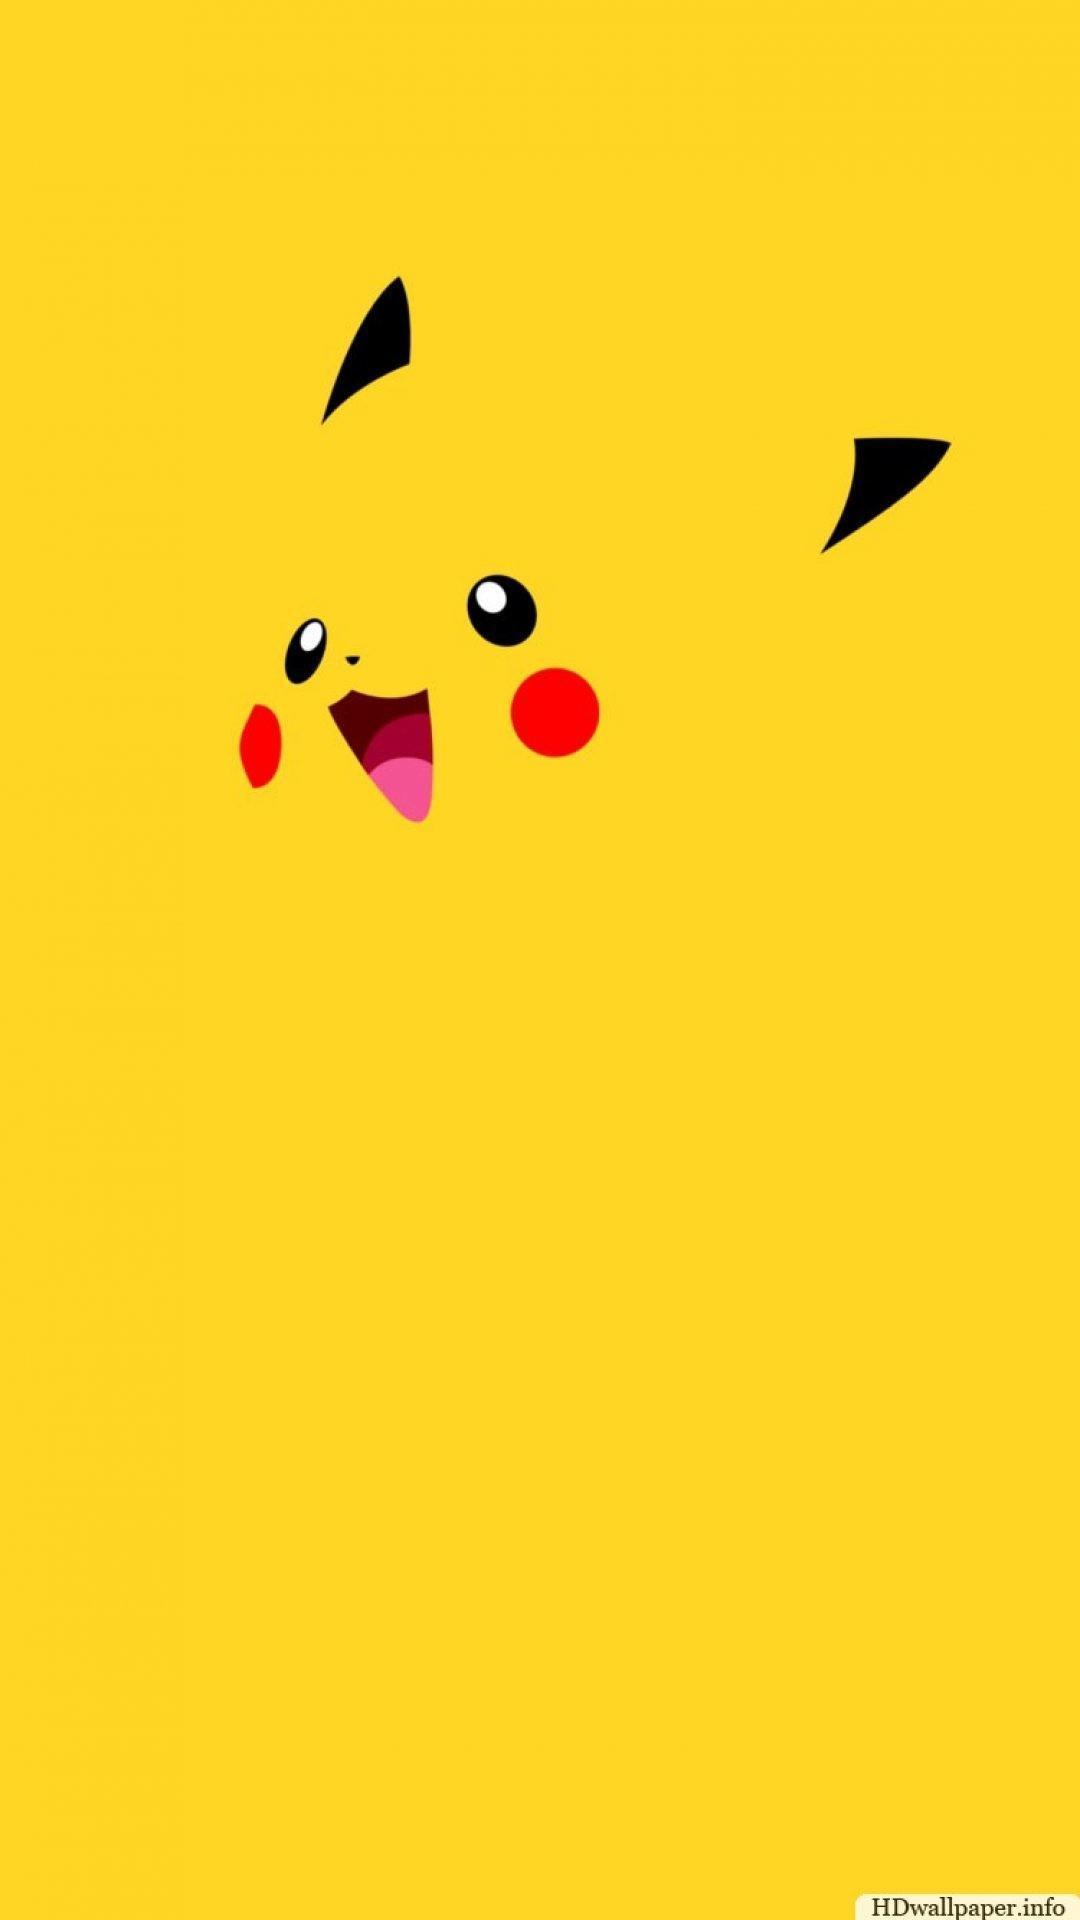 Pikachu HD Wallpaper for Android